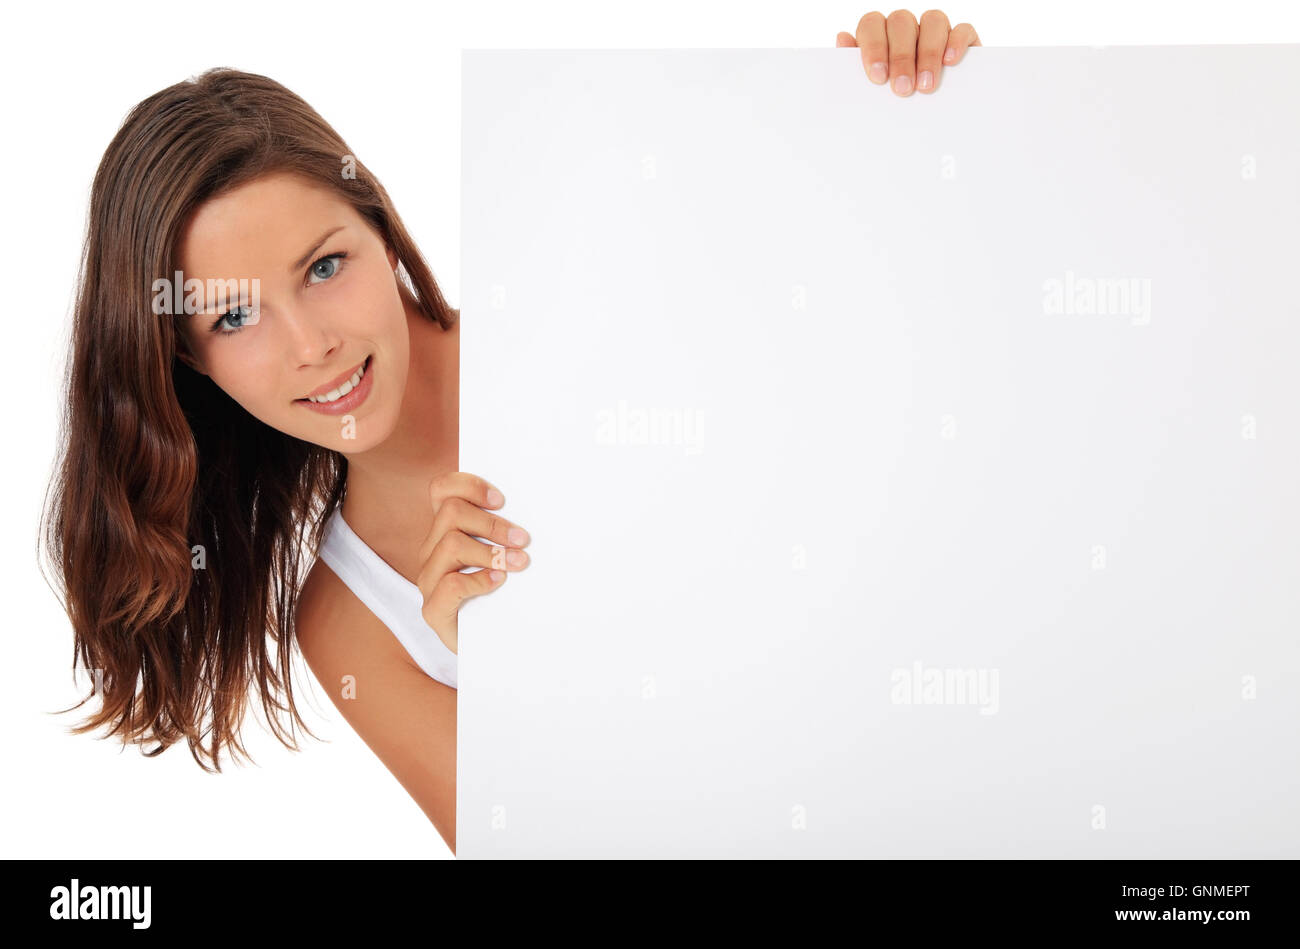 woman behind a blank white sign Stock Photo